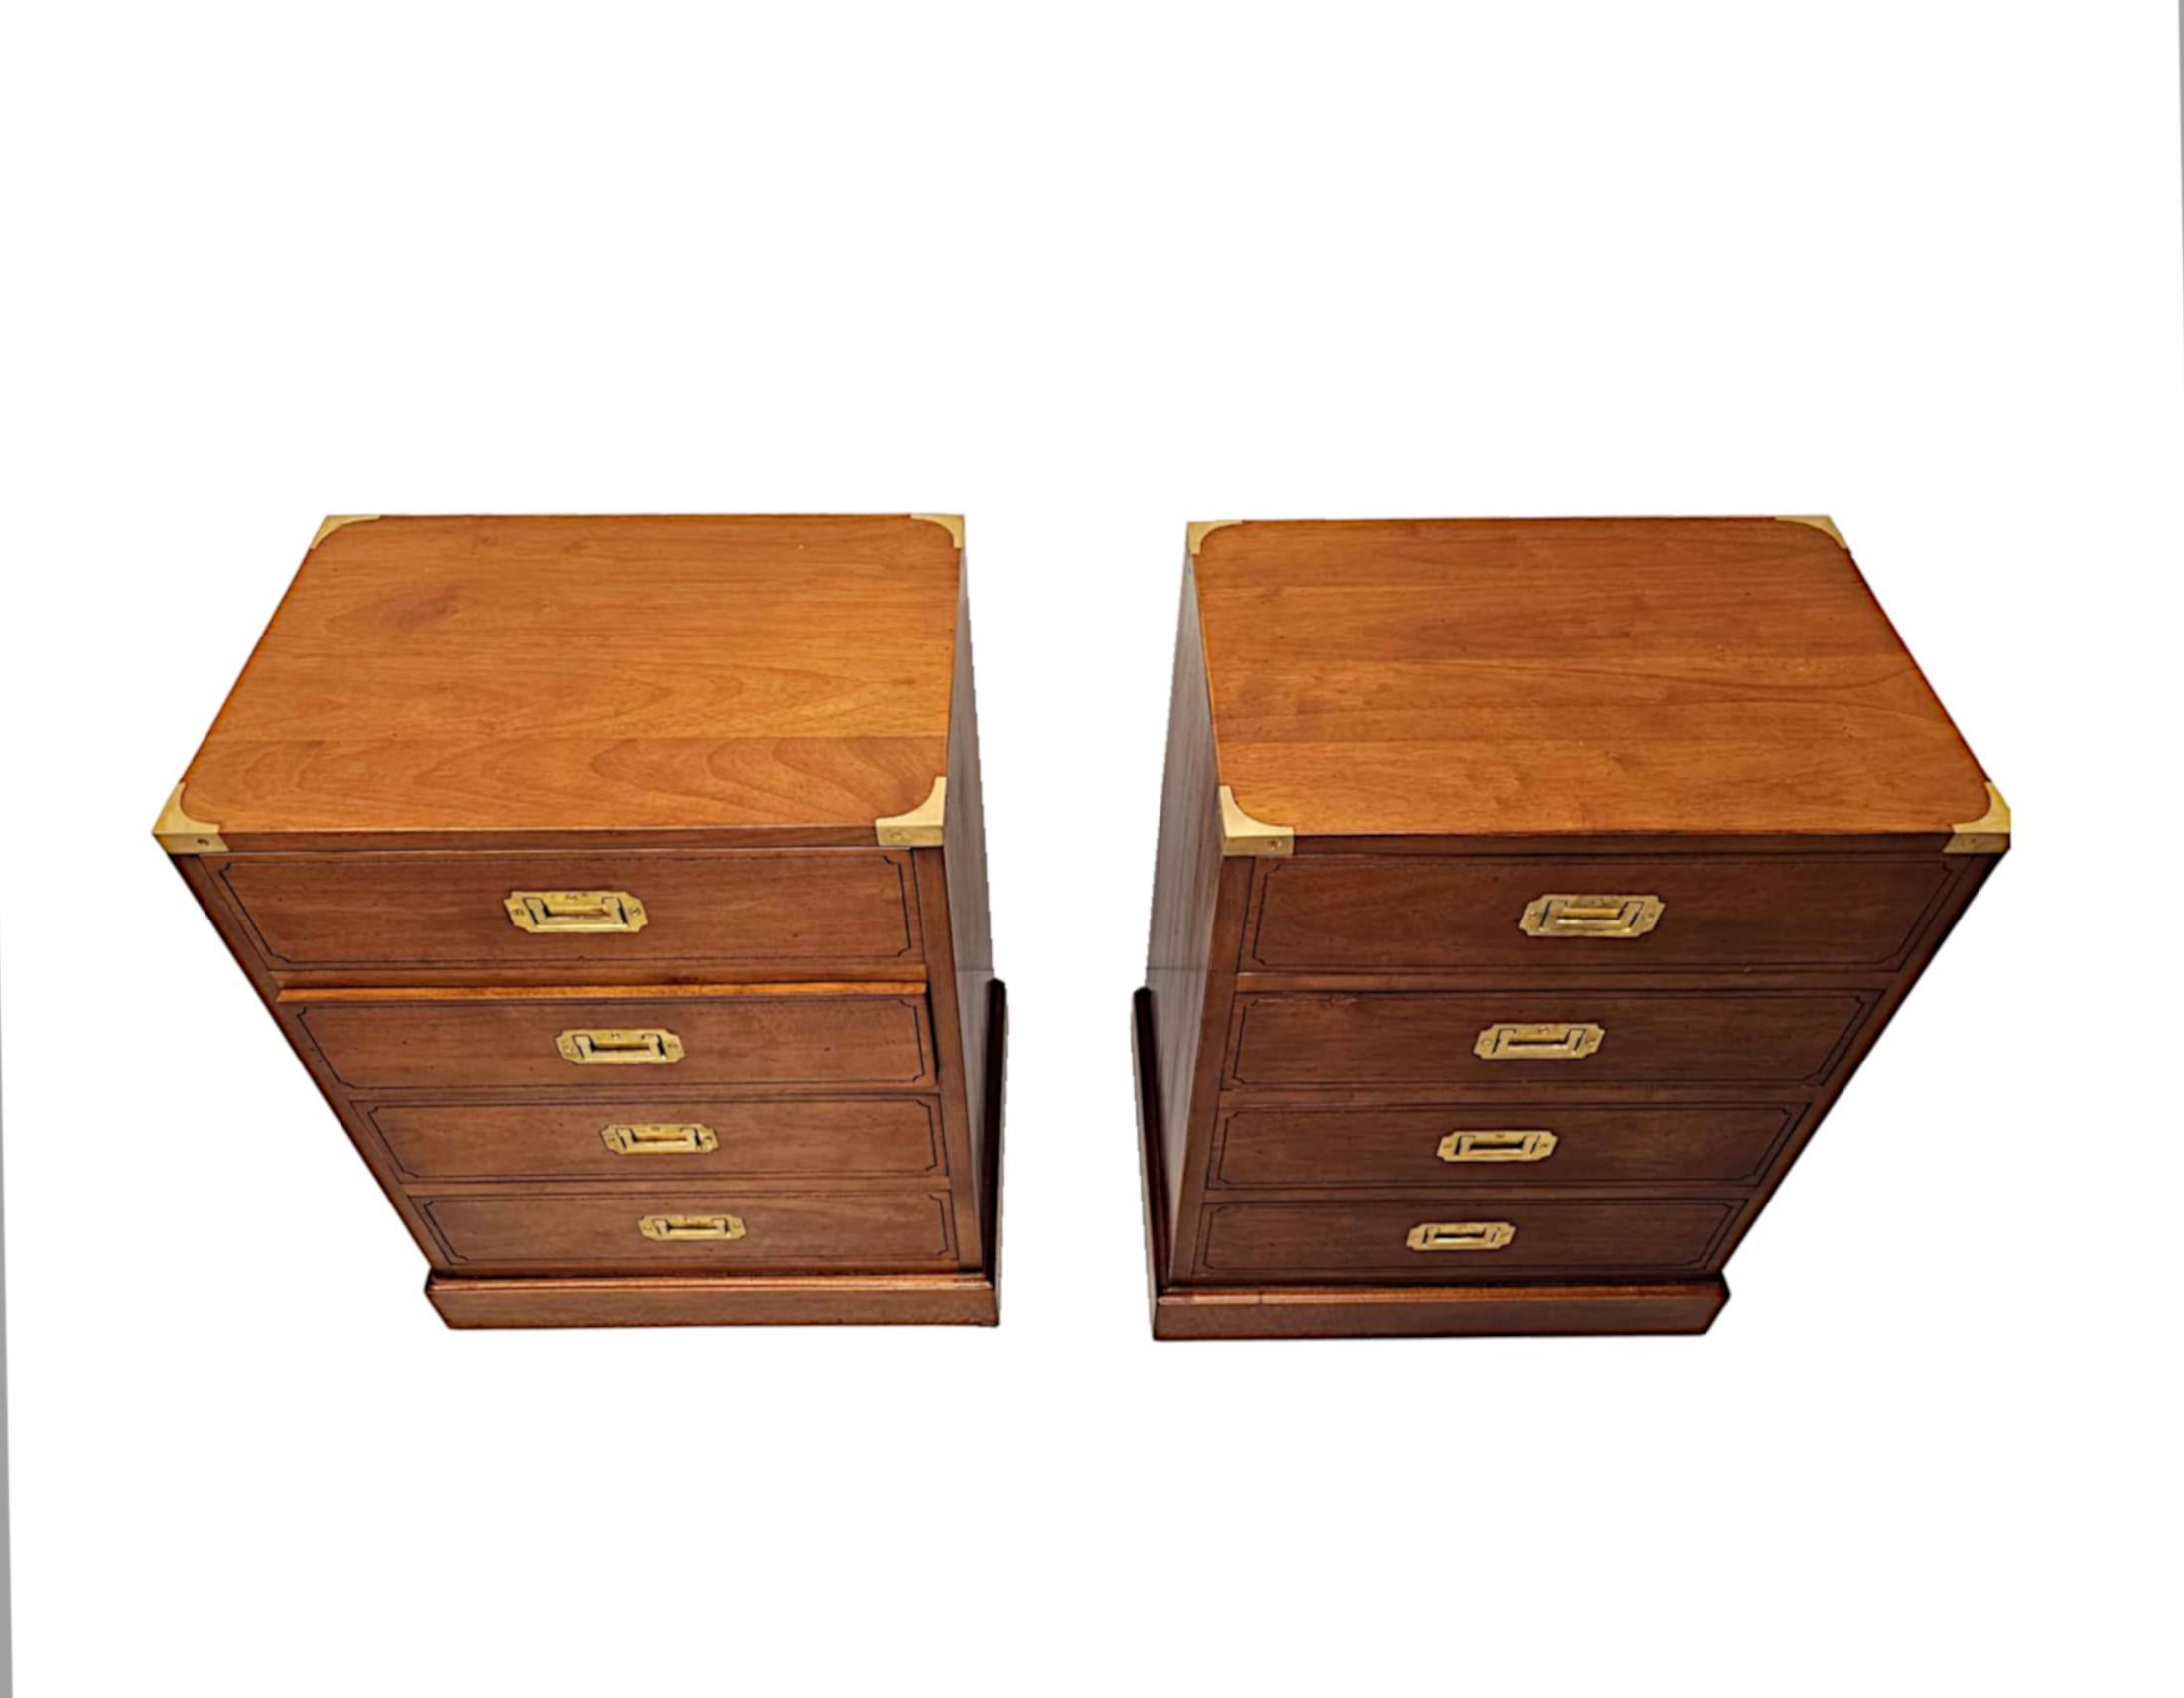 A very fine pair of bedside chests in the campaign style, of exceptional quality and fabulously hand made with gorgeously rich patination and grain.  The well figured moulded top of rectangular form framed with decorative brass corner mounts is